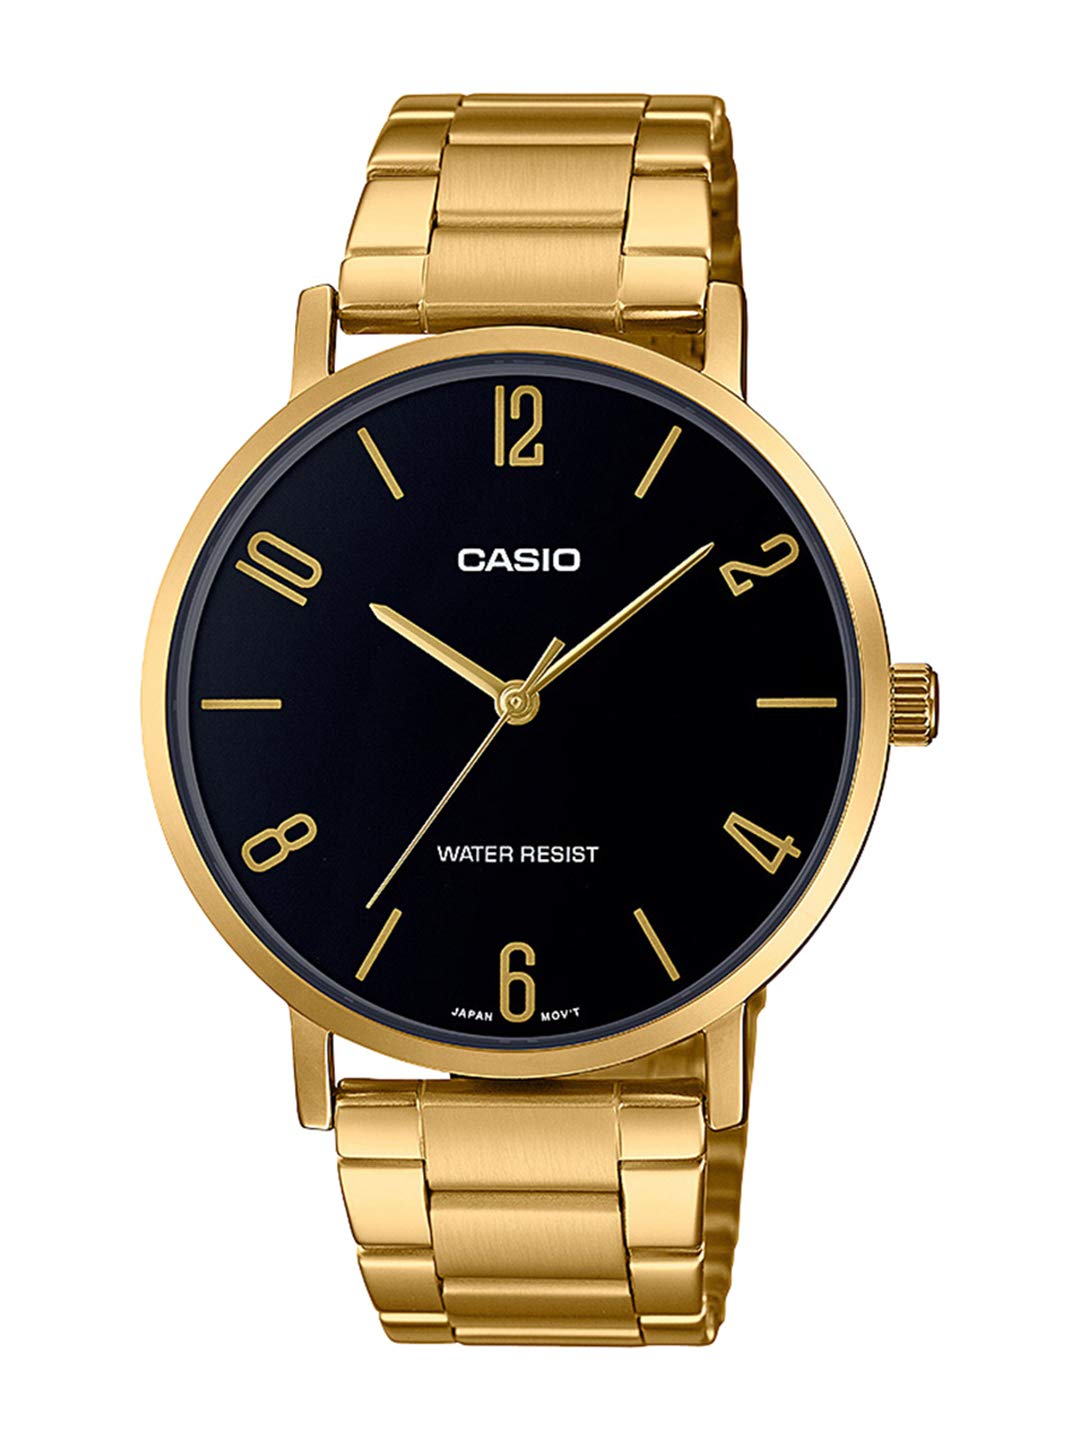 Casio MTP-VT01G-1B2 Men's Gold Tone Stainless Steel Minimalistic Black Dial 3-Hand Analog Watch